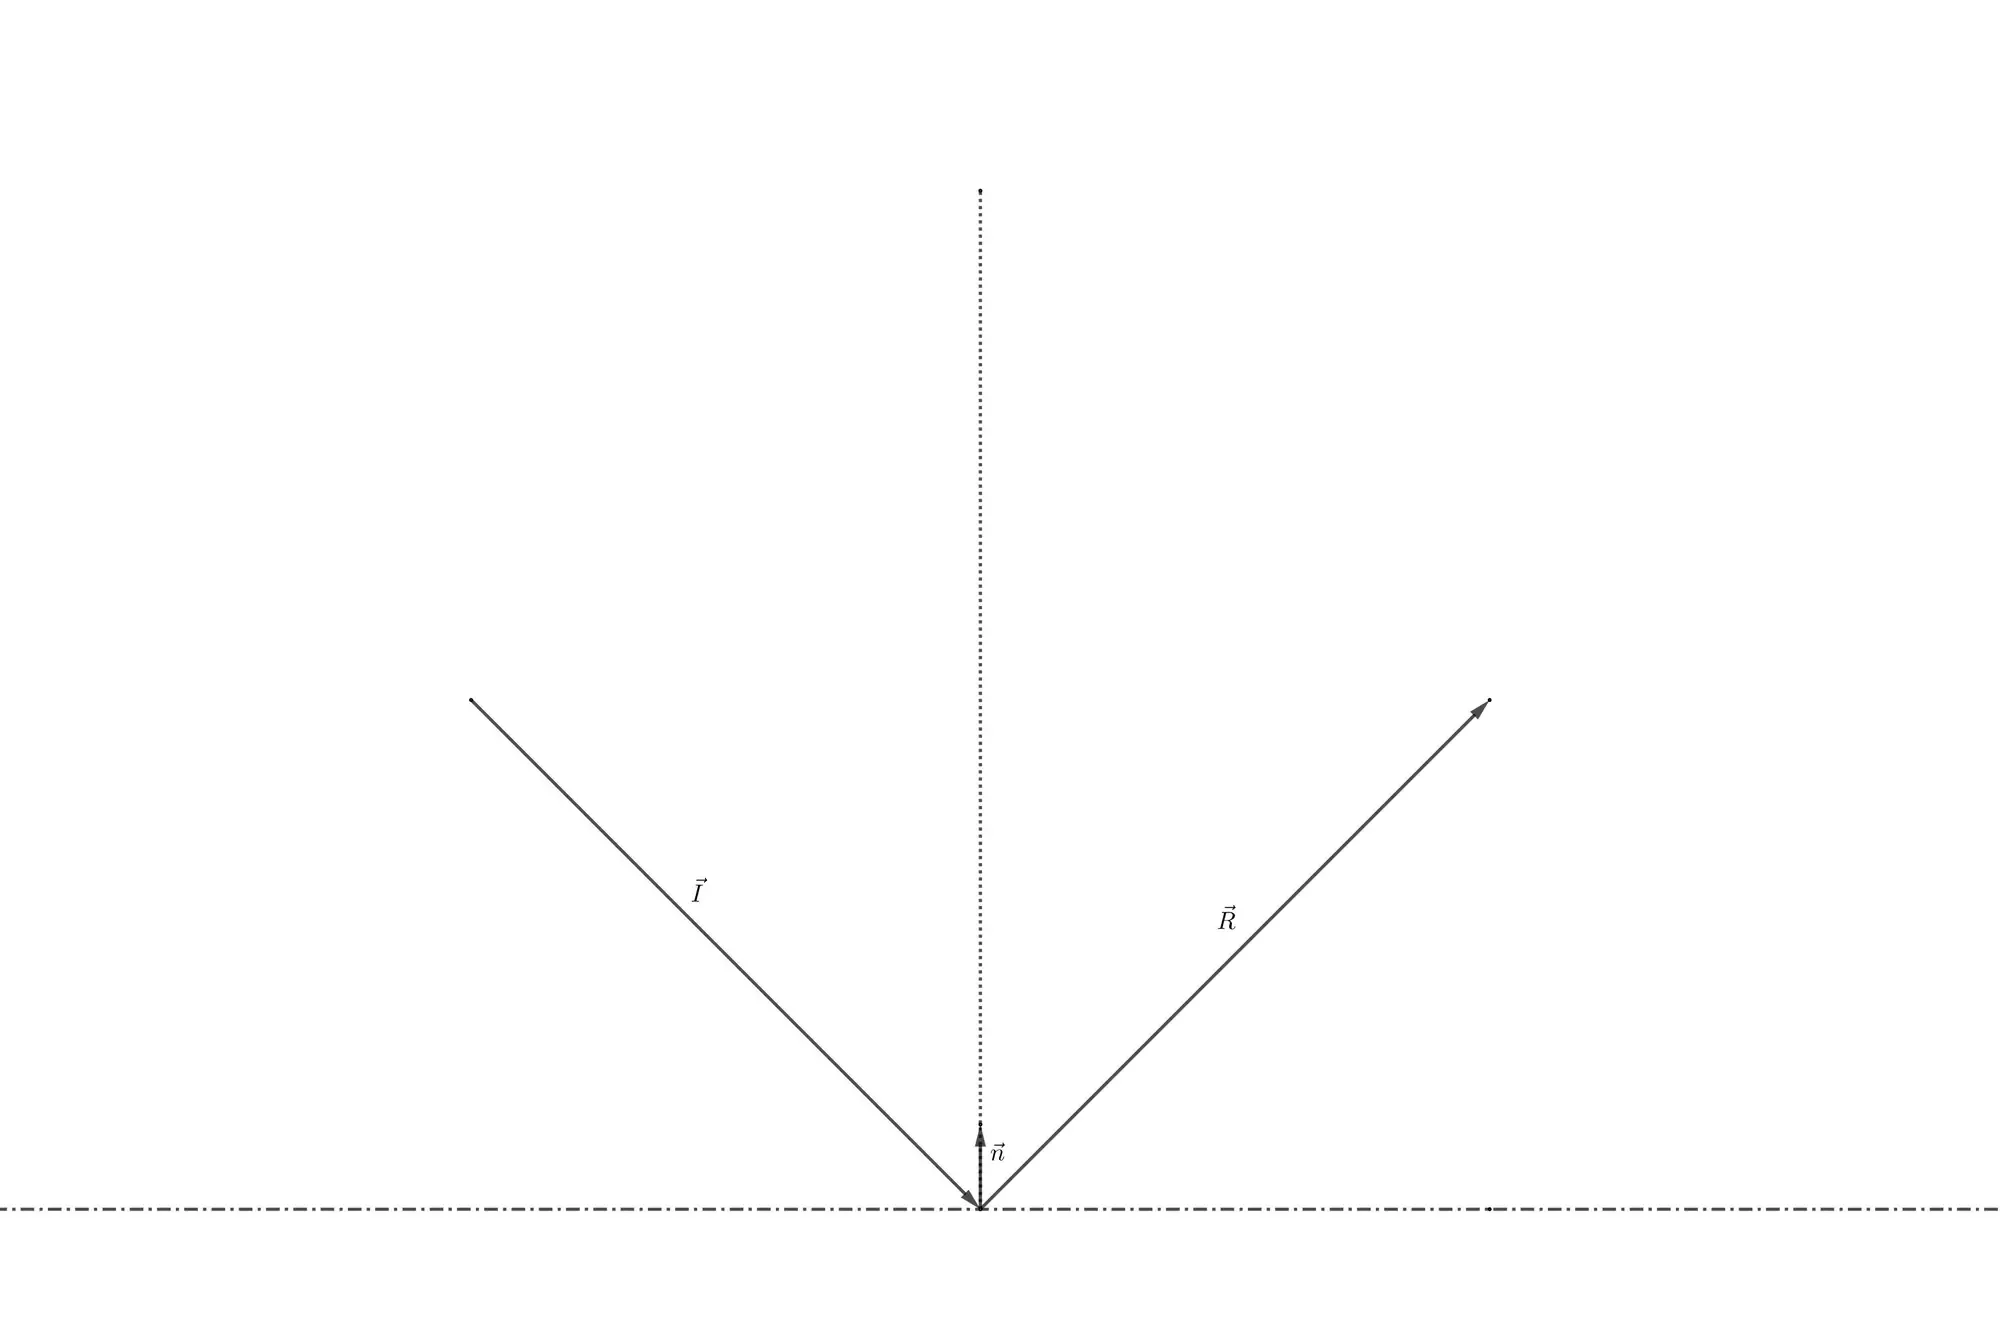 Given the initial vector direction (I) and the normal to the plane (n), compute the reflection vector!